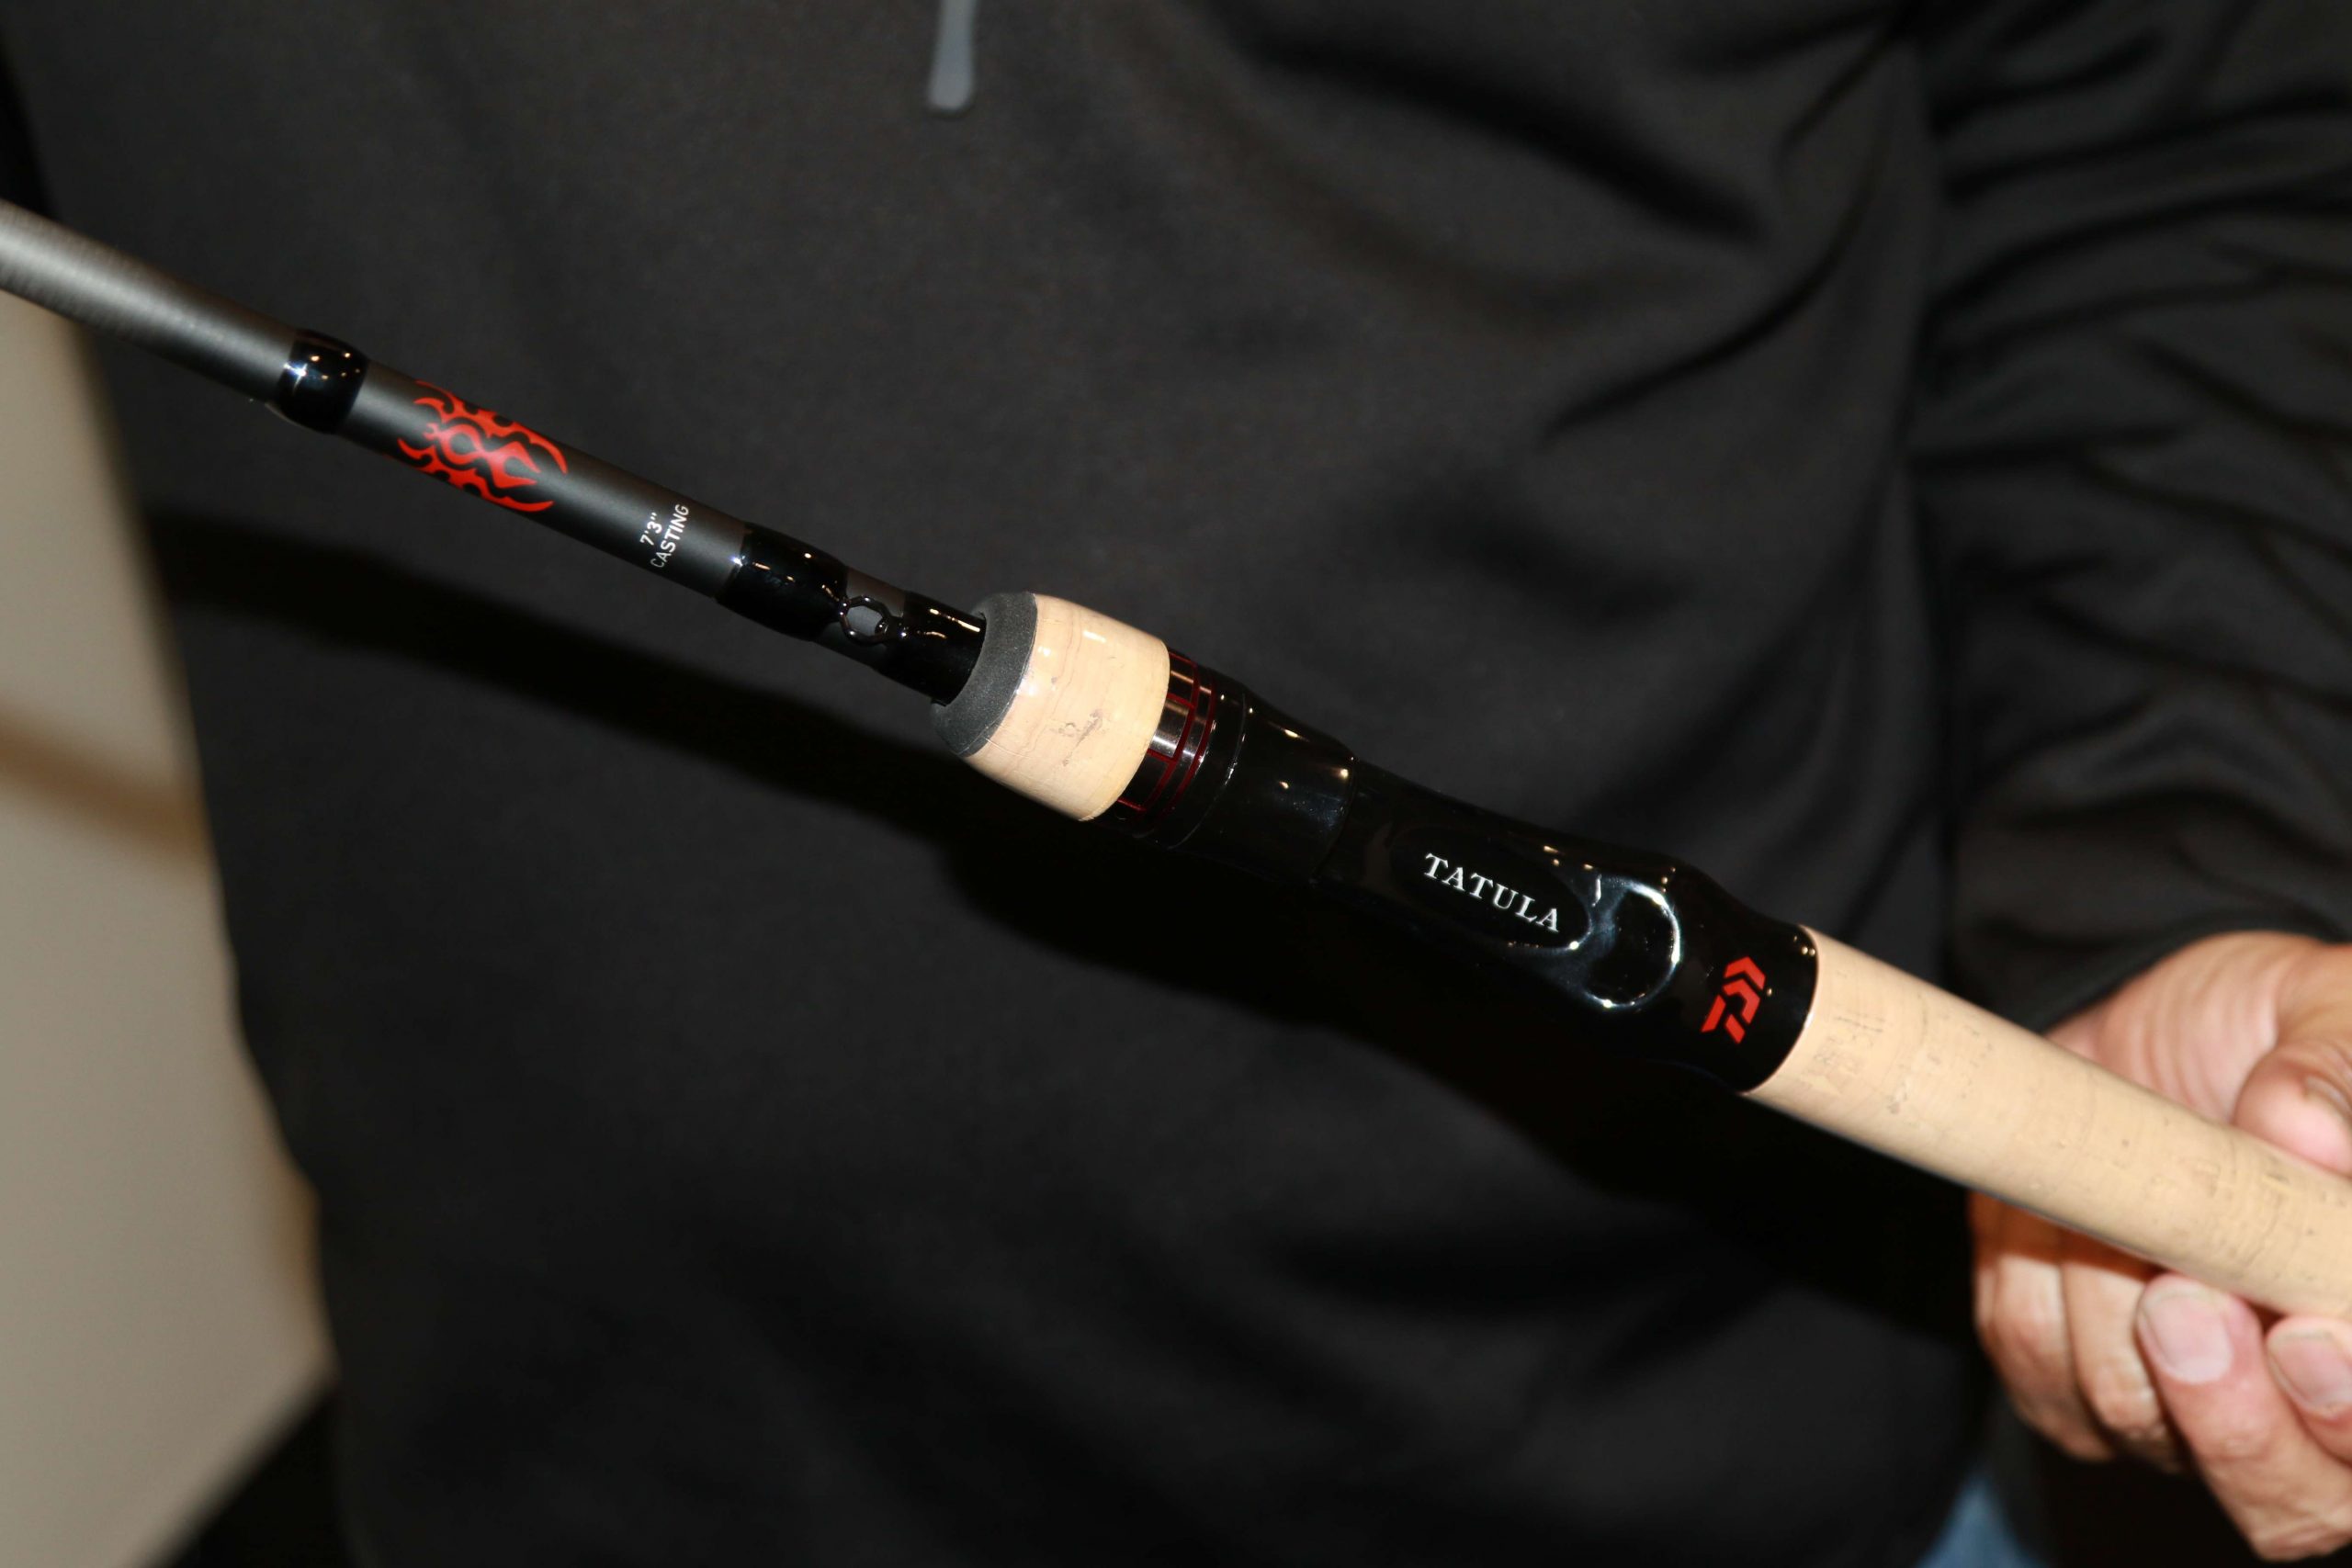 Pairing nicely with the 60th anniversary Tatula baitcaster is Daiwaâs 7-3 medium heavy limited edition rod.